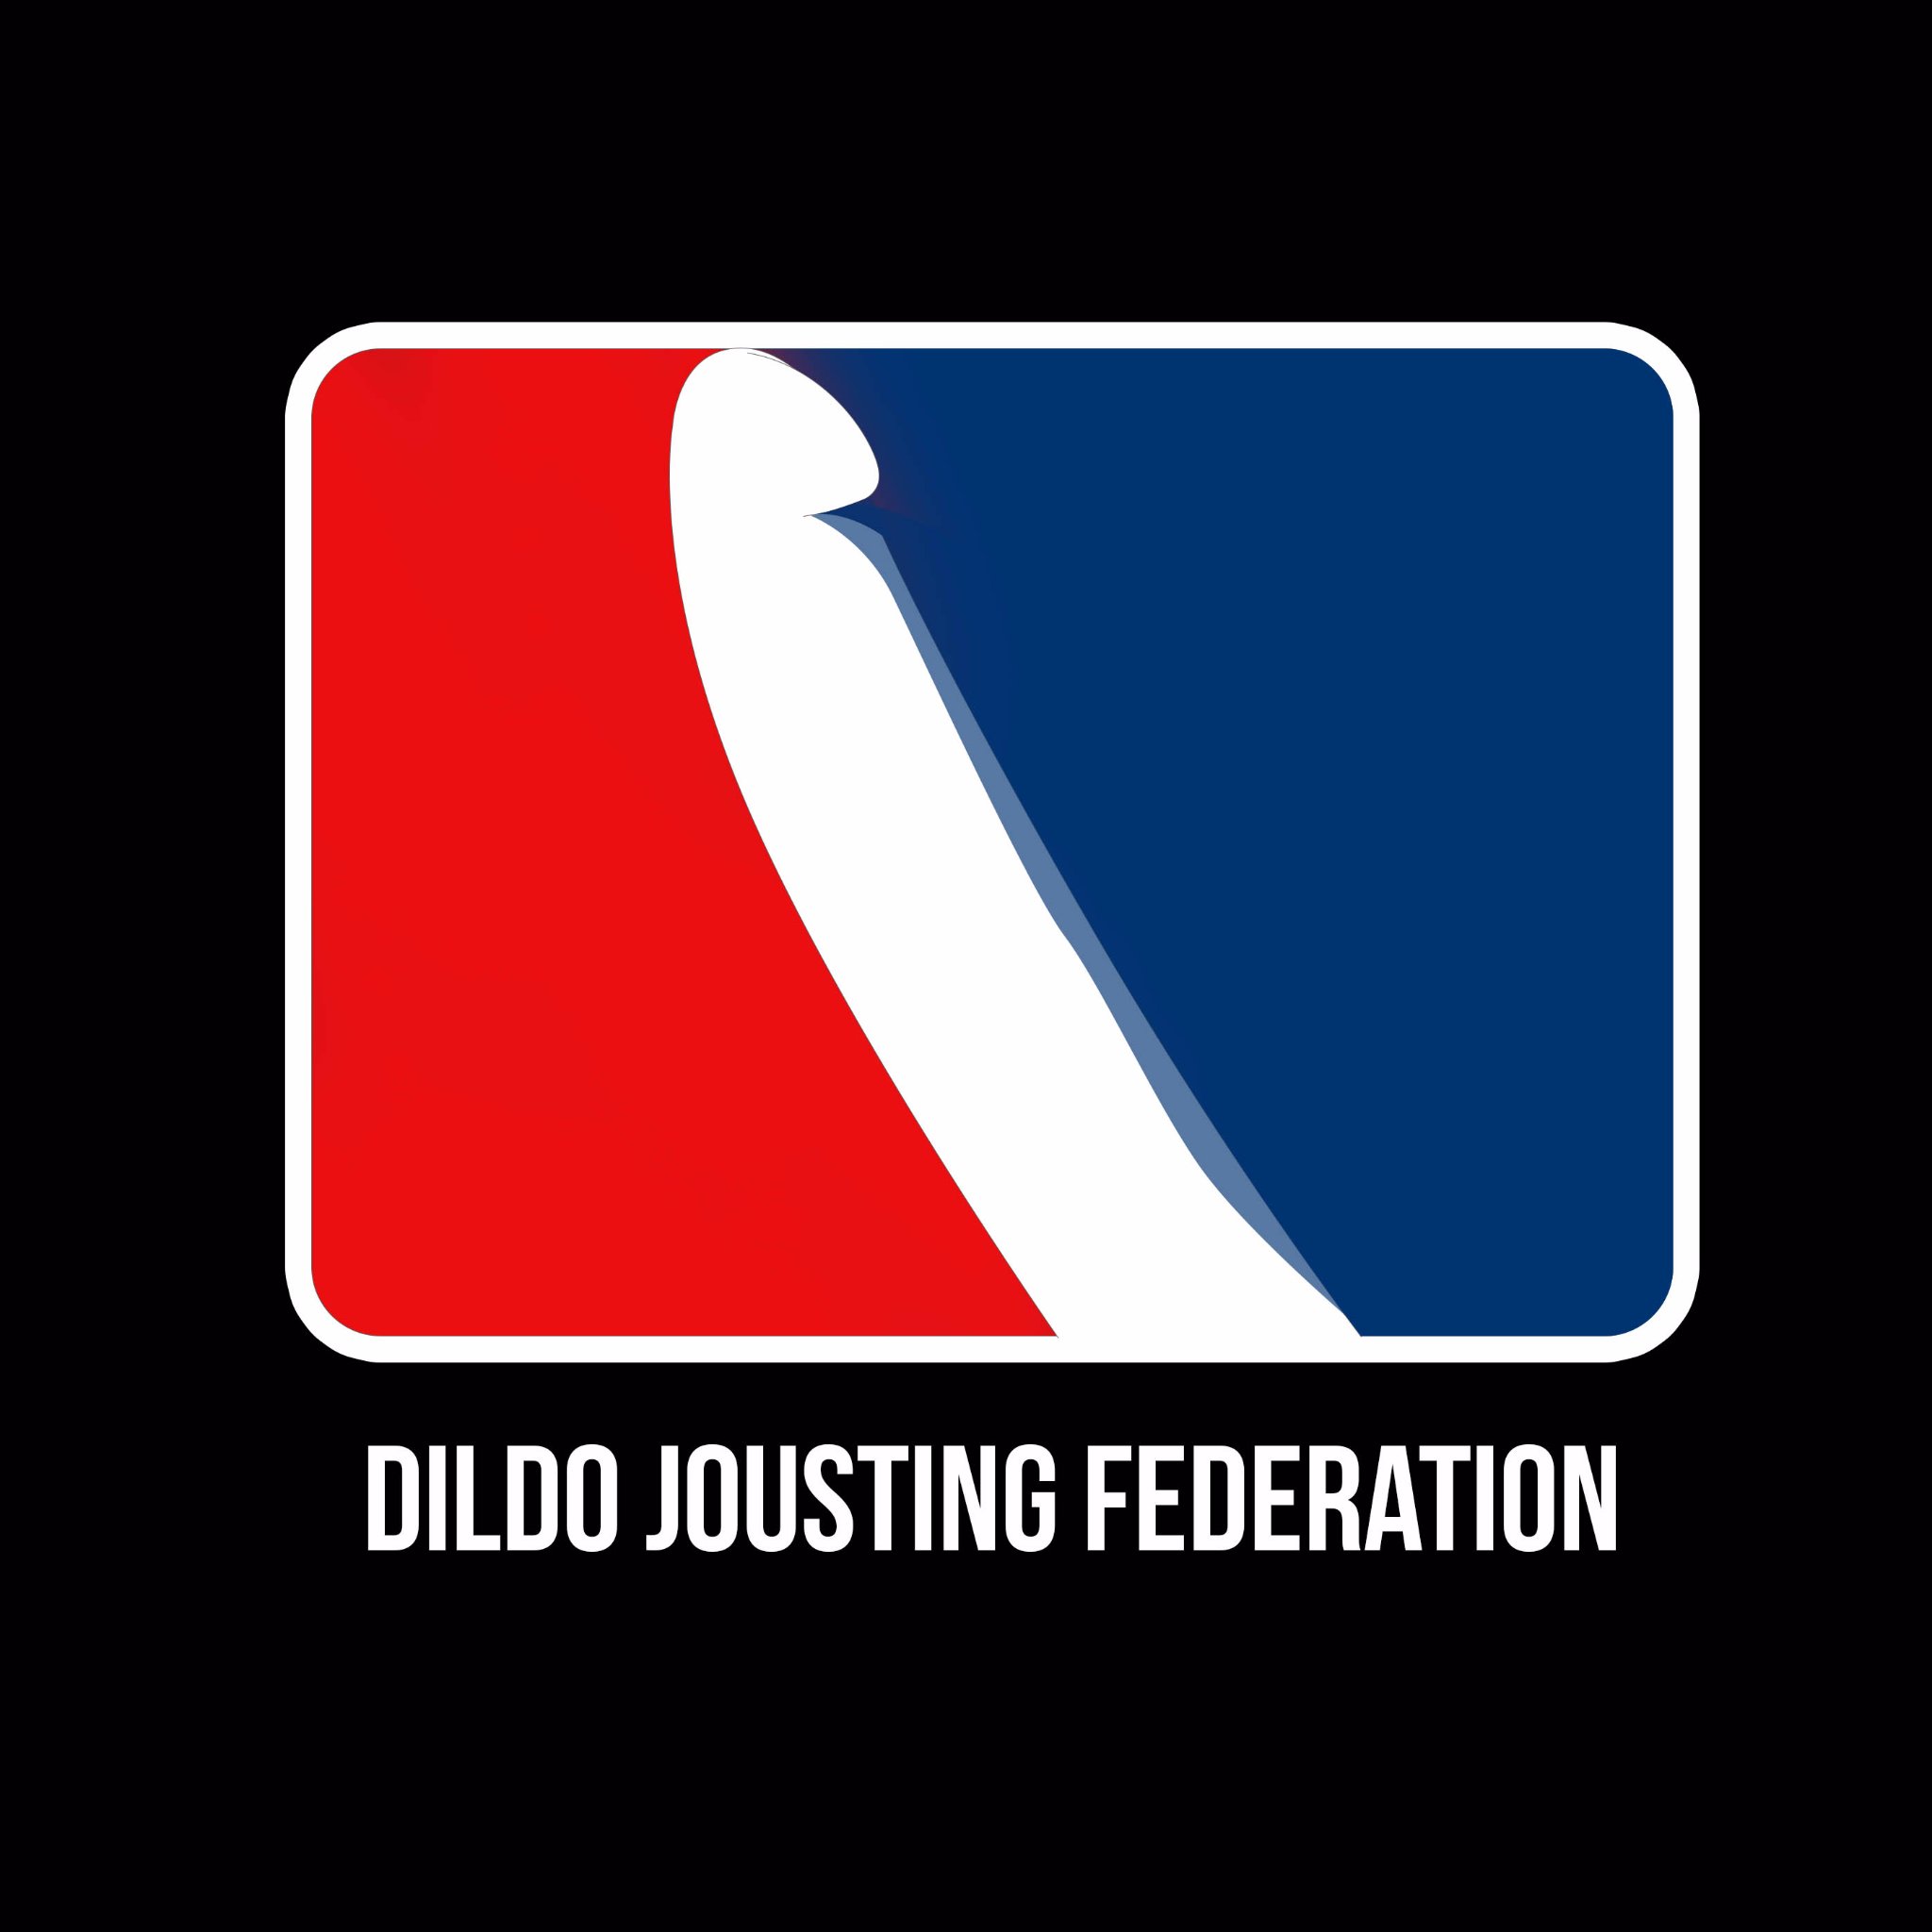 We are the Dildo Jousting Federation. Dildo Jousting is a revolutionary new sport sweeping the globe. Competitors compete with 17'' dildos affixed to a pipe.